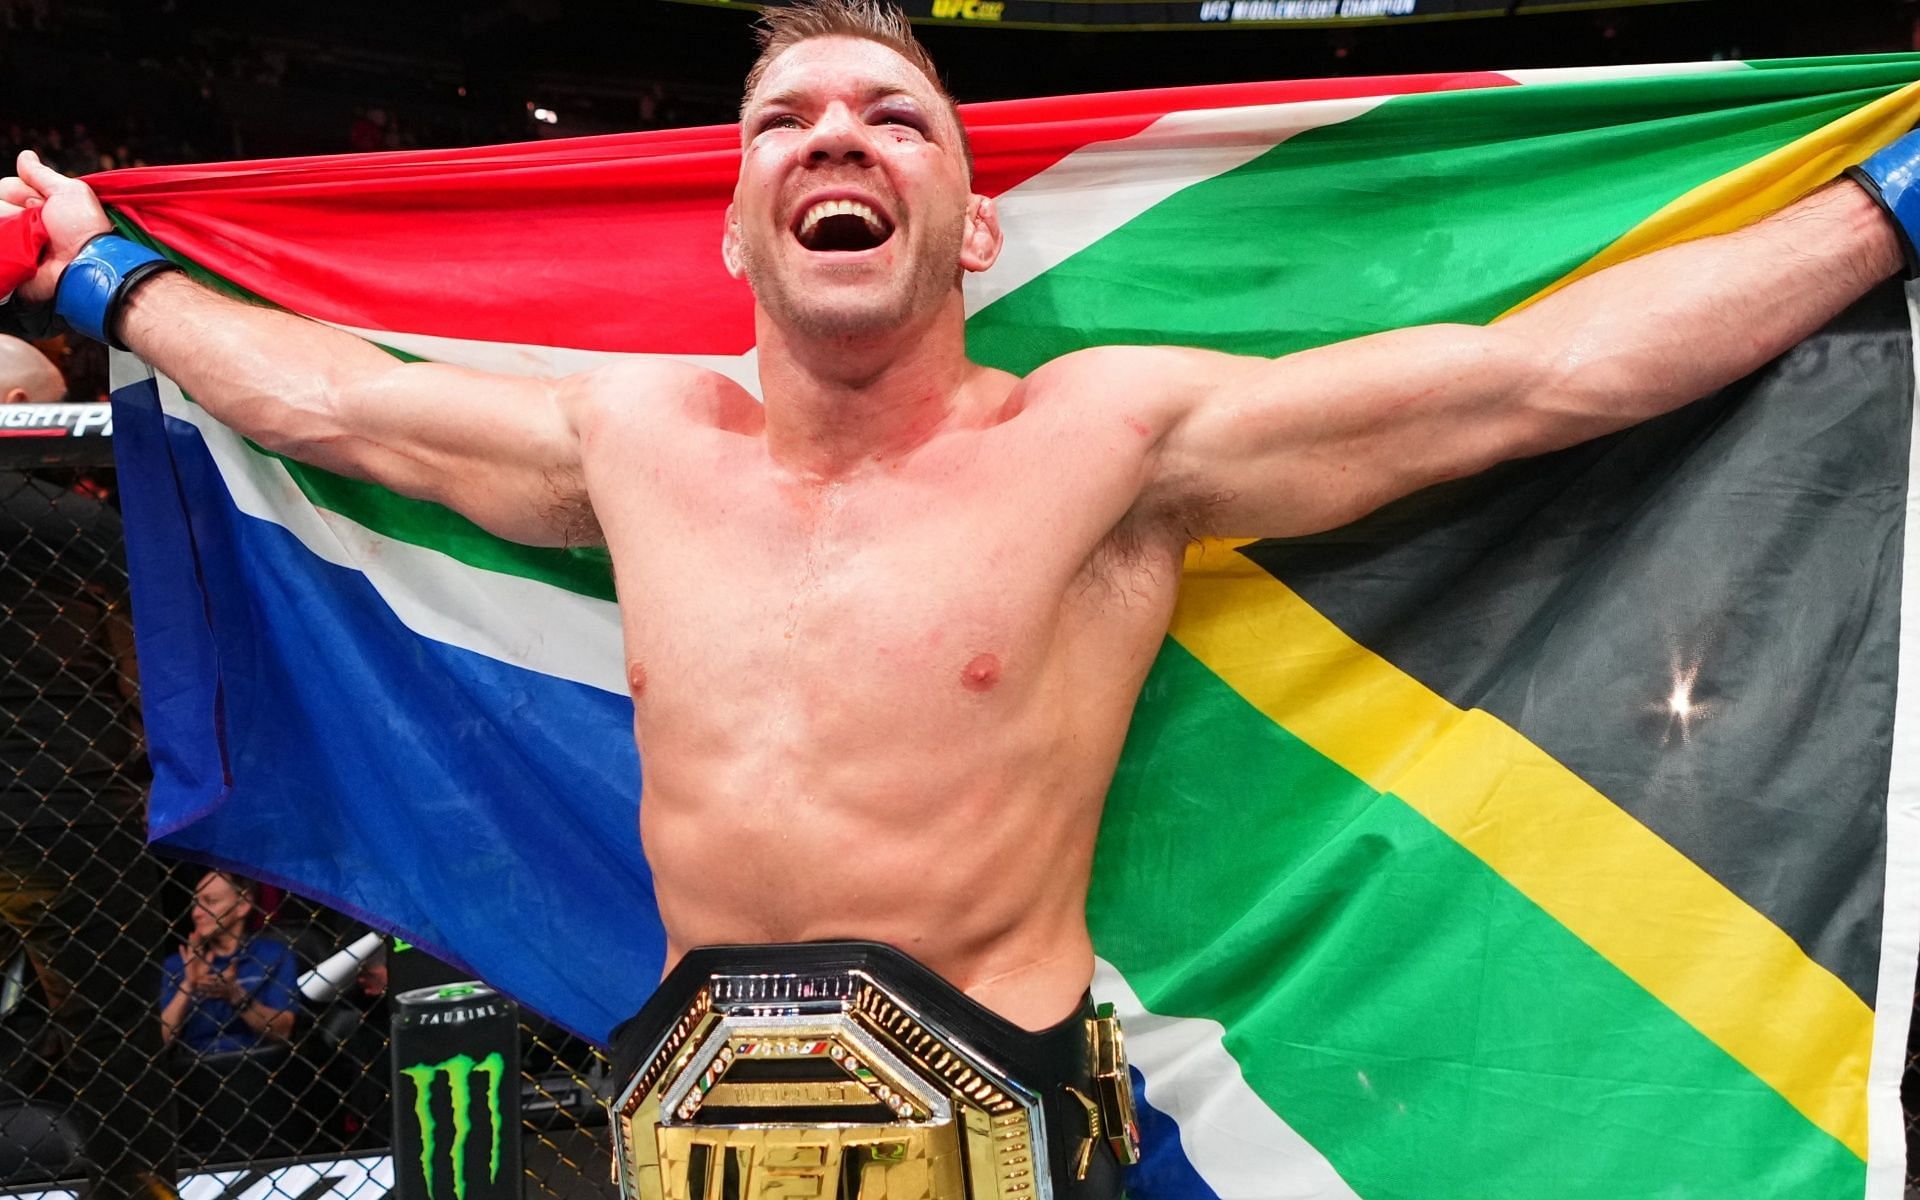 UFC's Top 25 Highest-Earning Fighters For 2020 Have Been Revealed